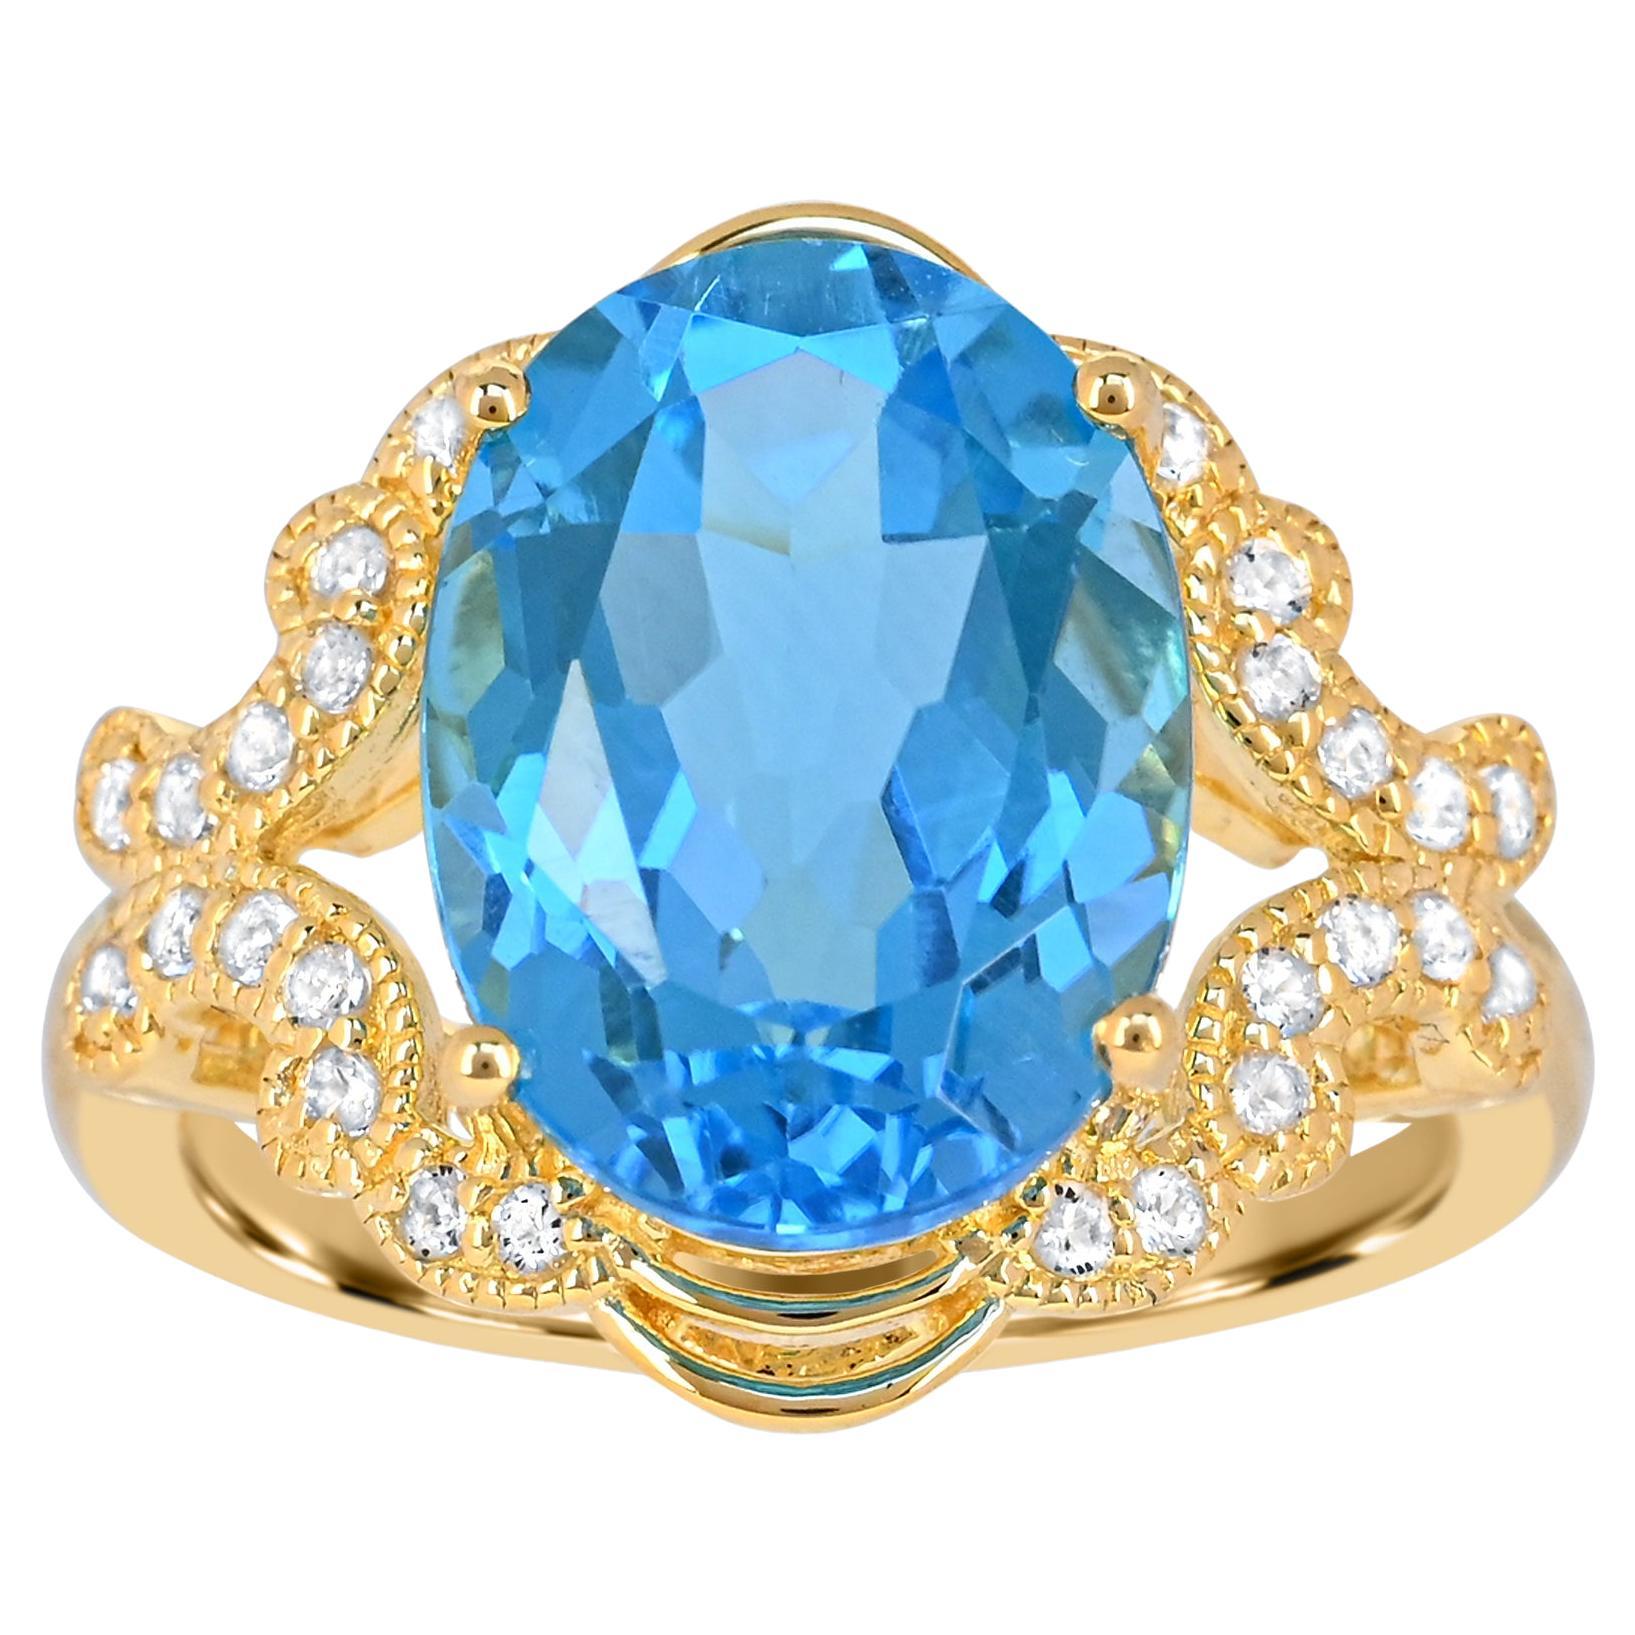 8-1/6 ct. Blue and White Topaz 14K Yellow Gold over Sterling Silver Ring